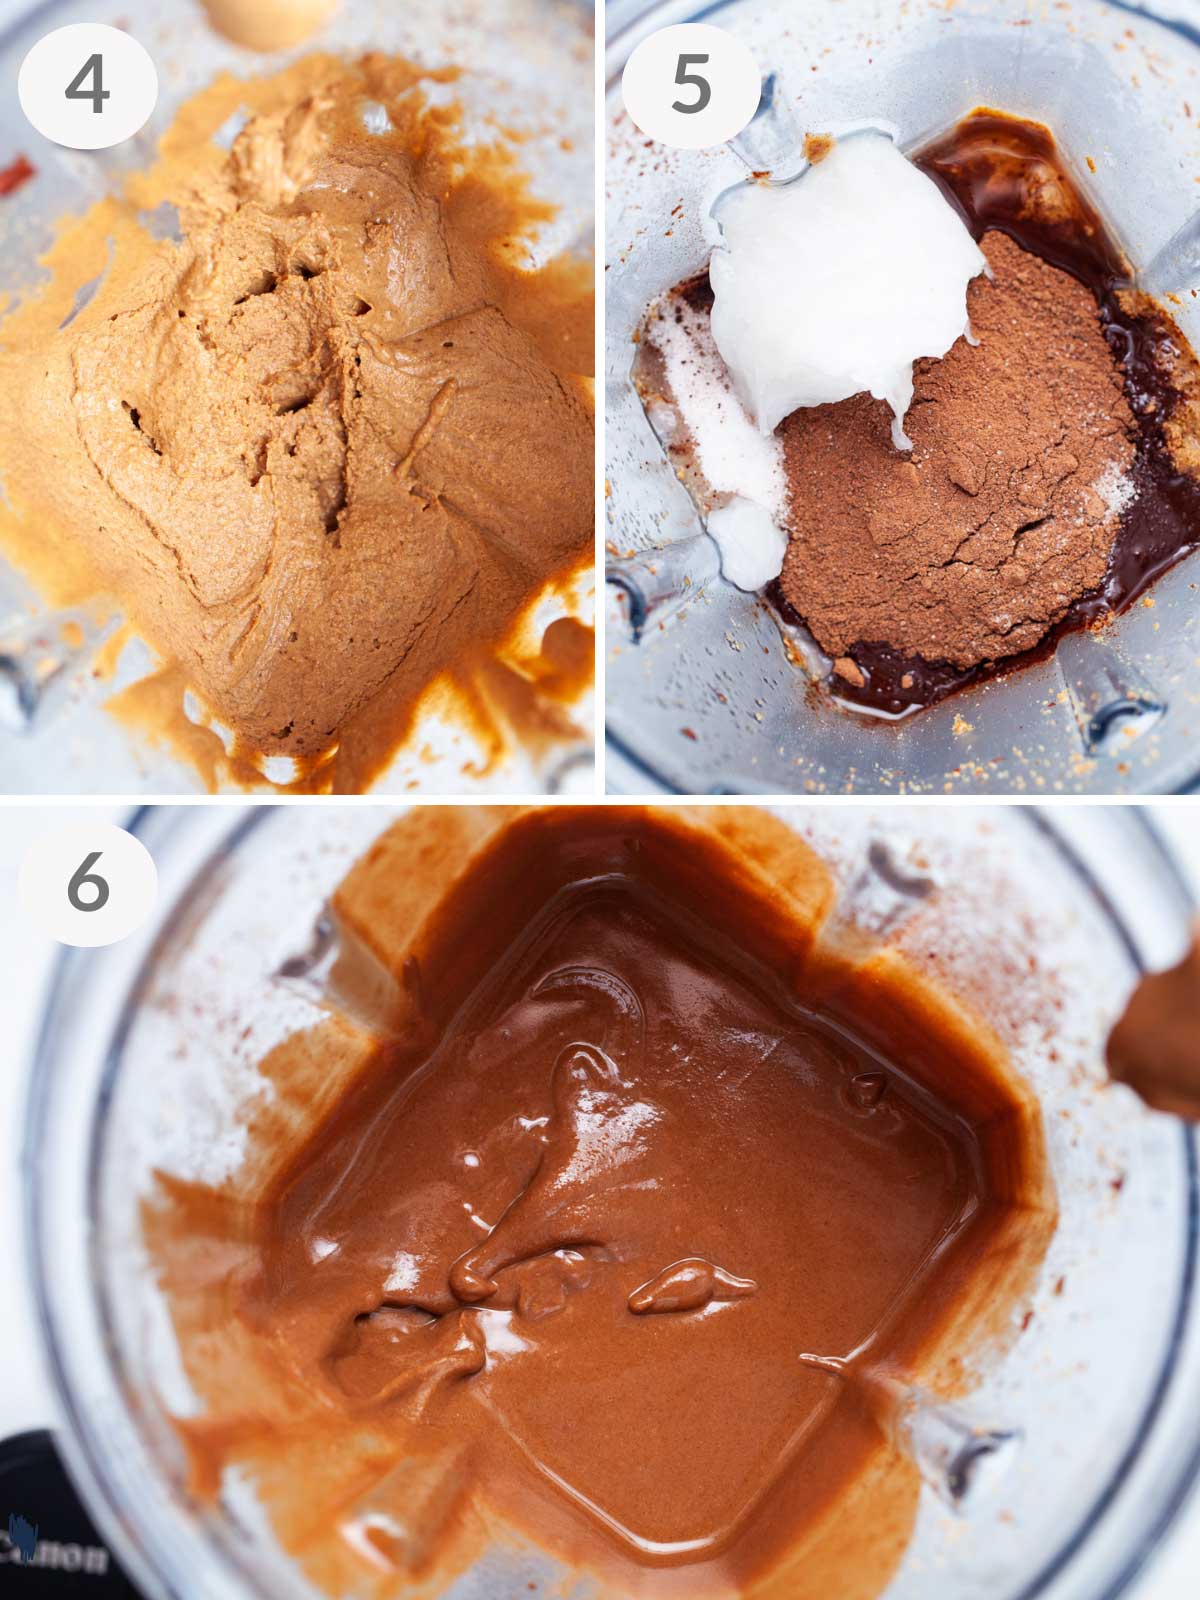 A series of steps showing how to make chocolate peanut butter spread in a blender.